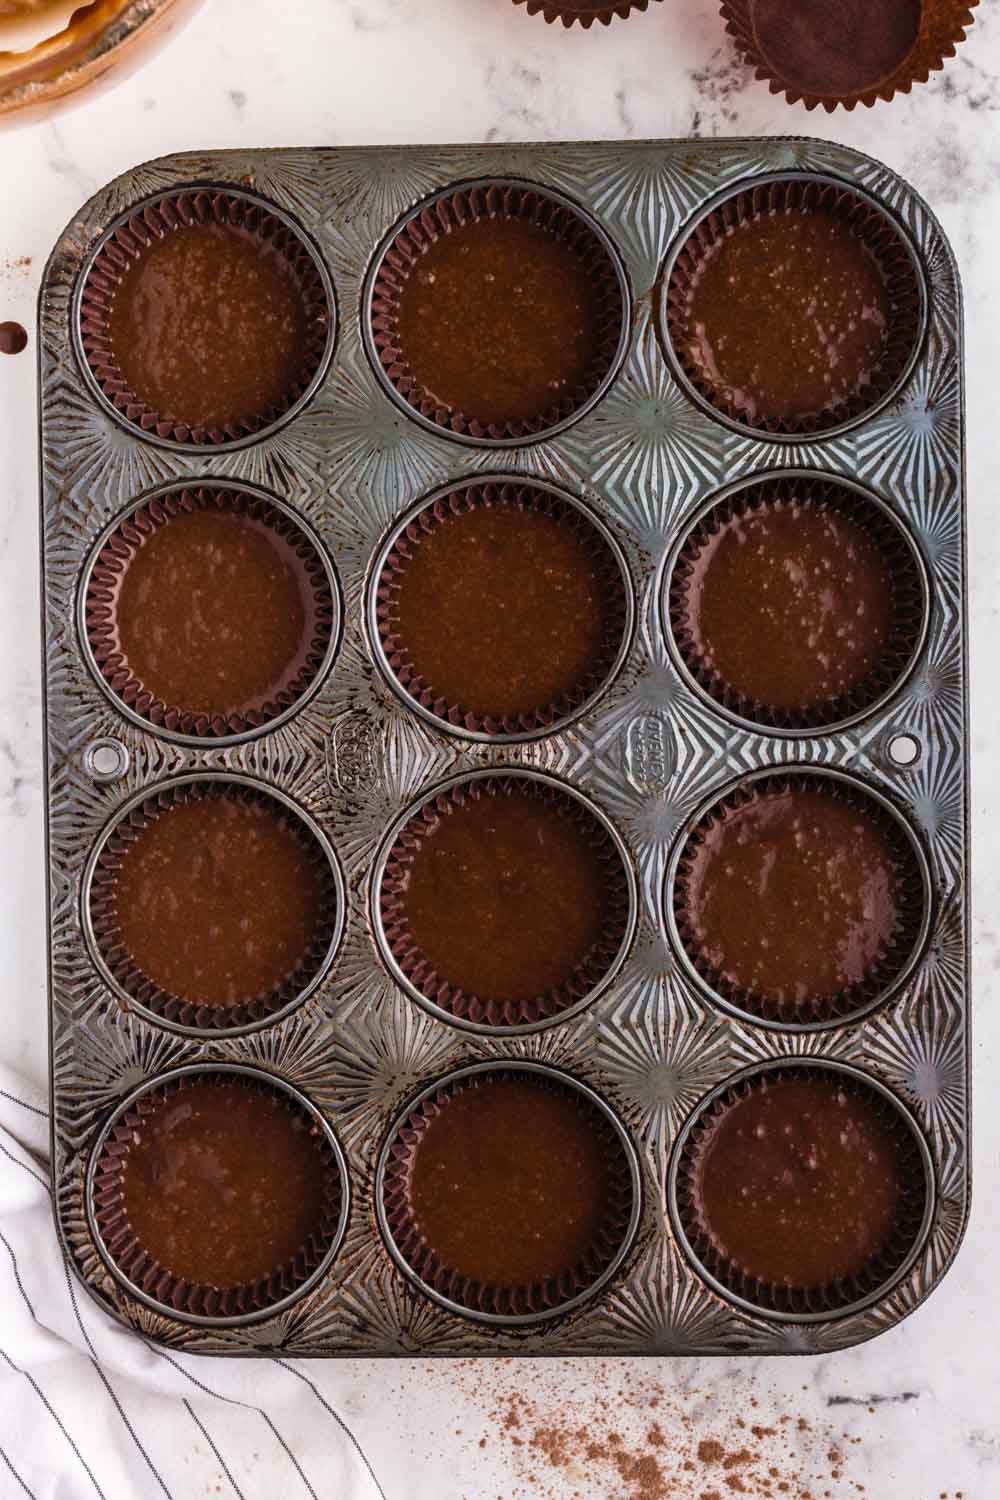 Chocolate cupcake batter poured into prepared metal muffin tin, on top of a marble surface, linen cloth in background